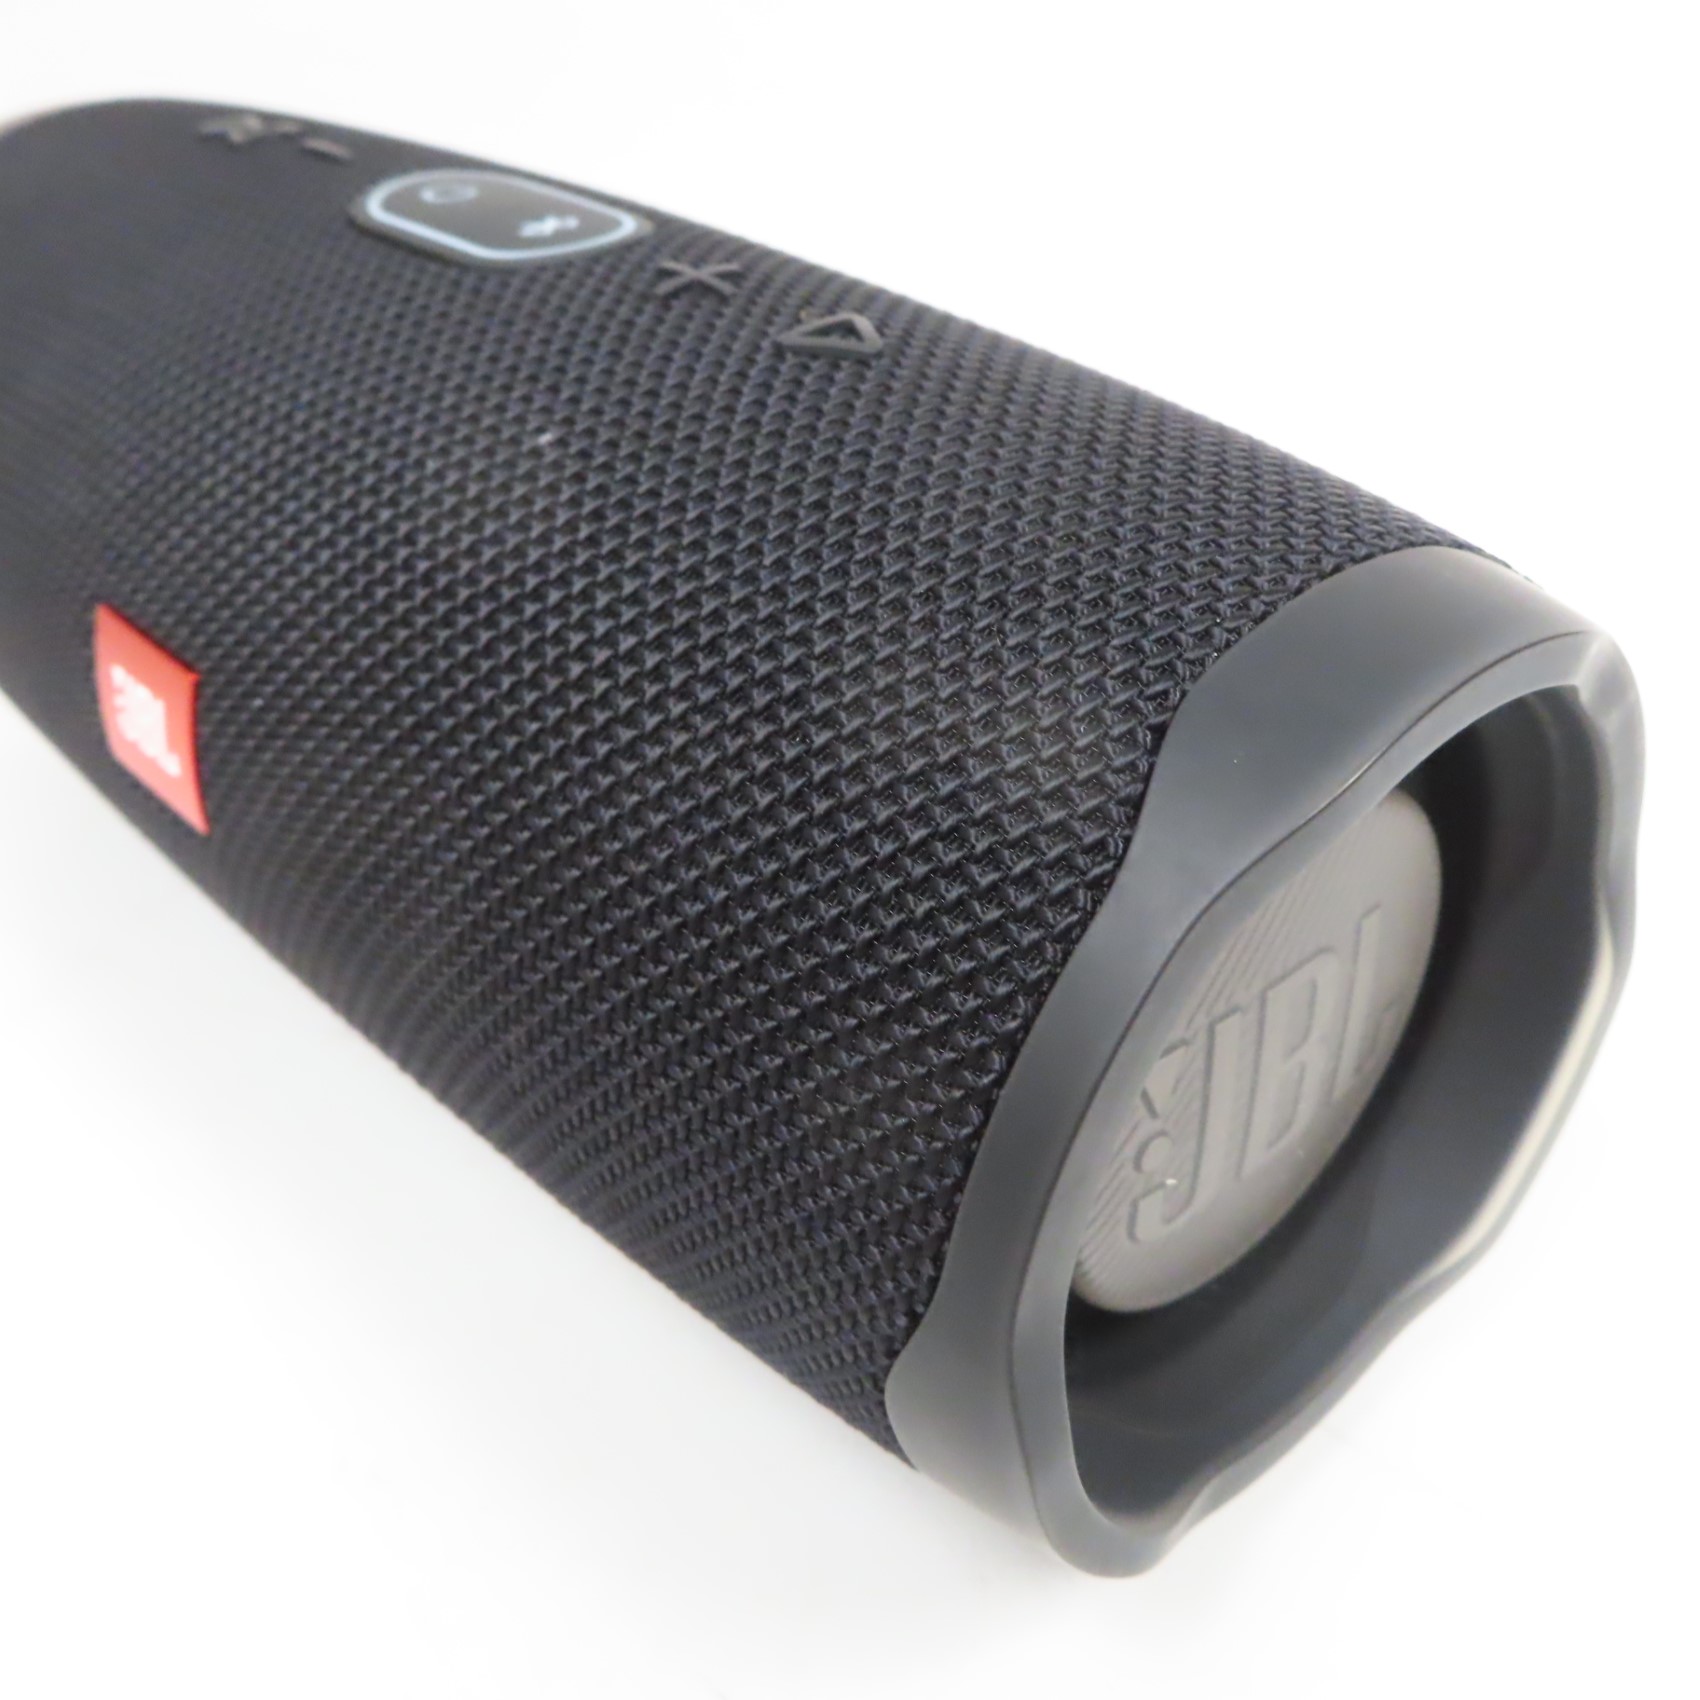 JBL Charge 4 review: JBL Charge 4 Bluetooth speaker gets some key